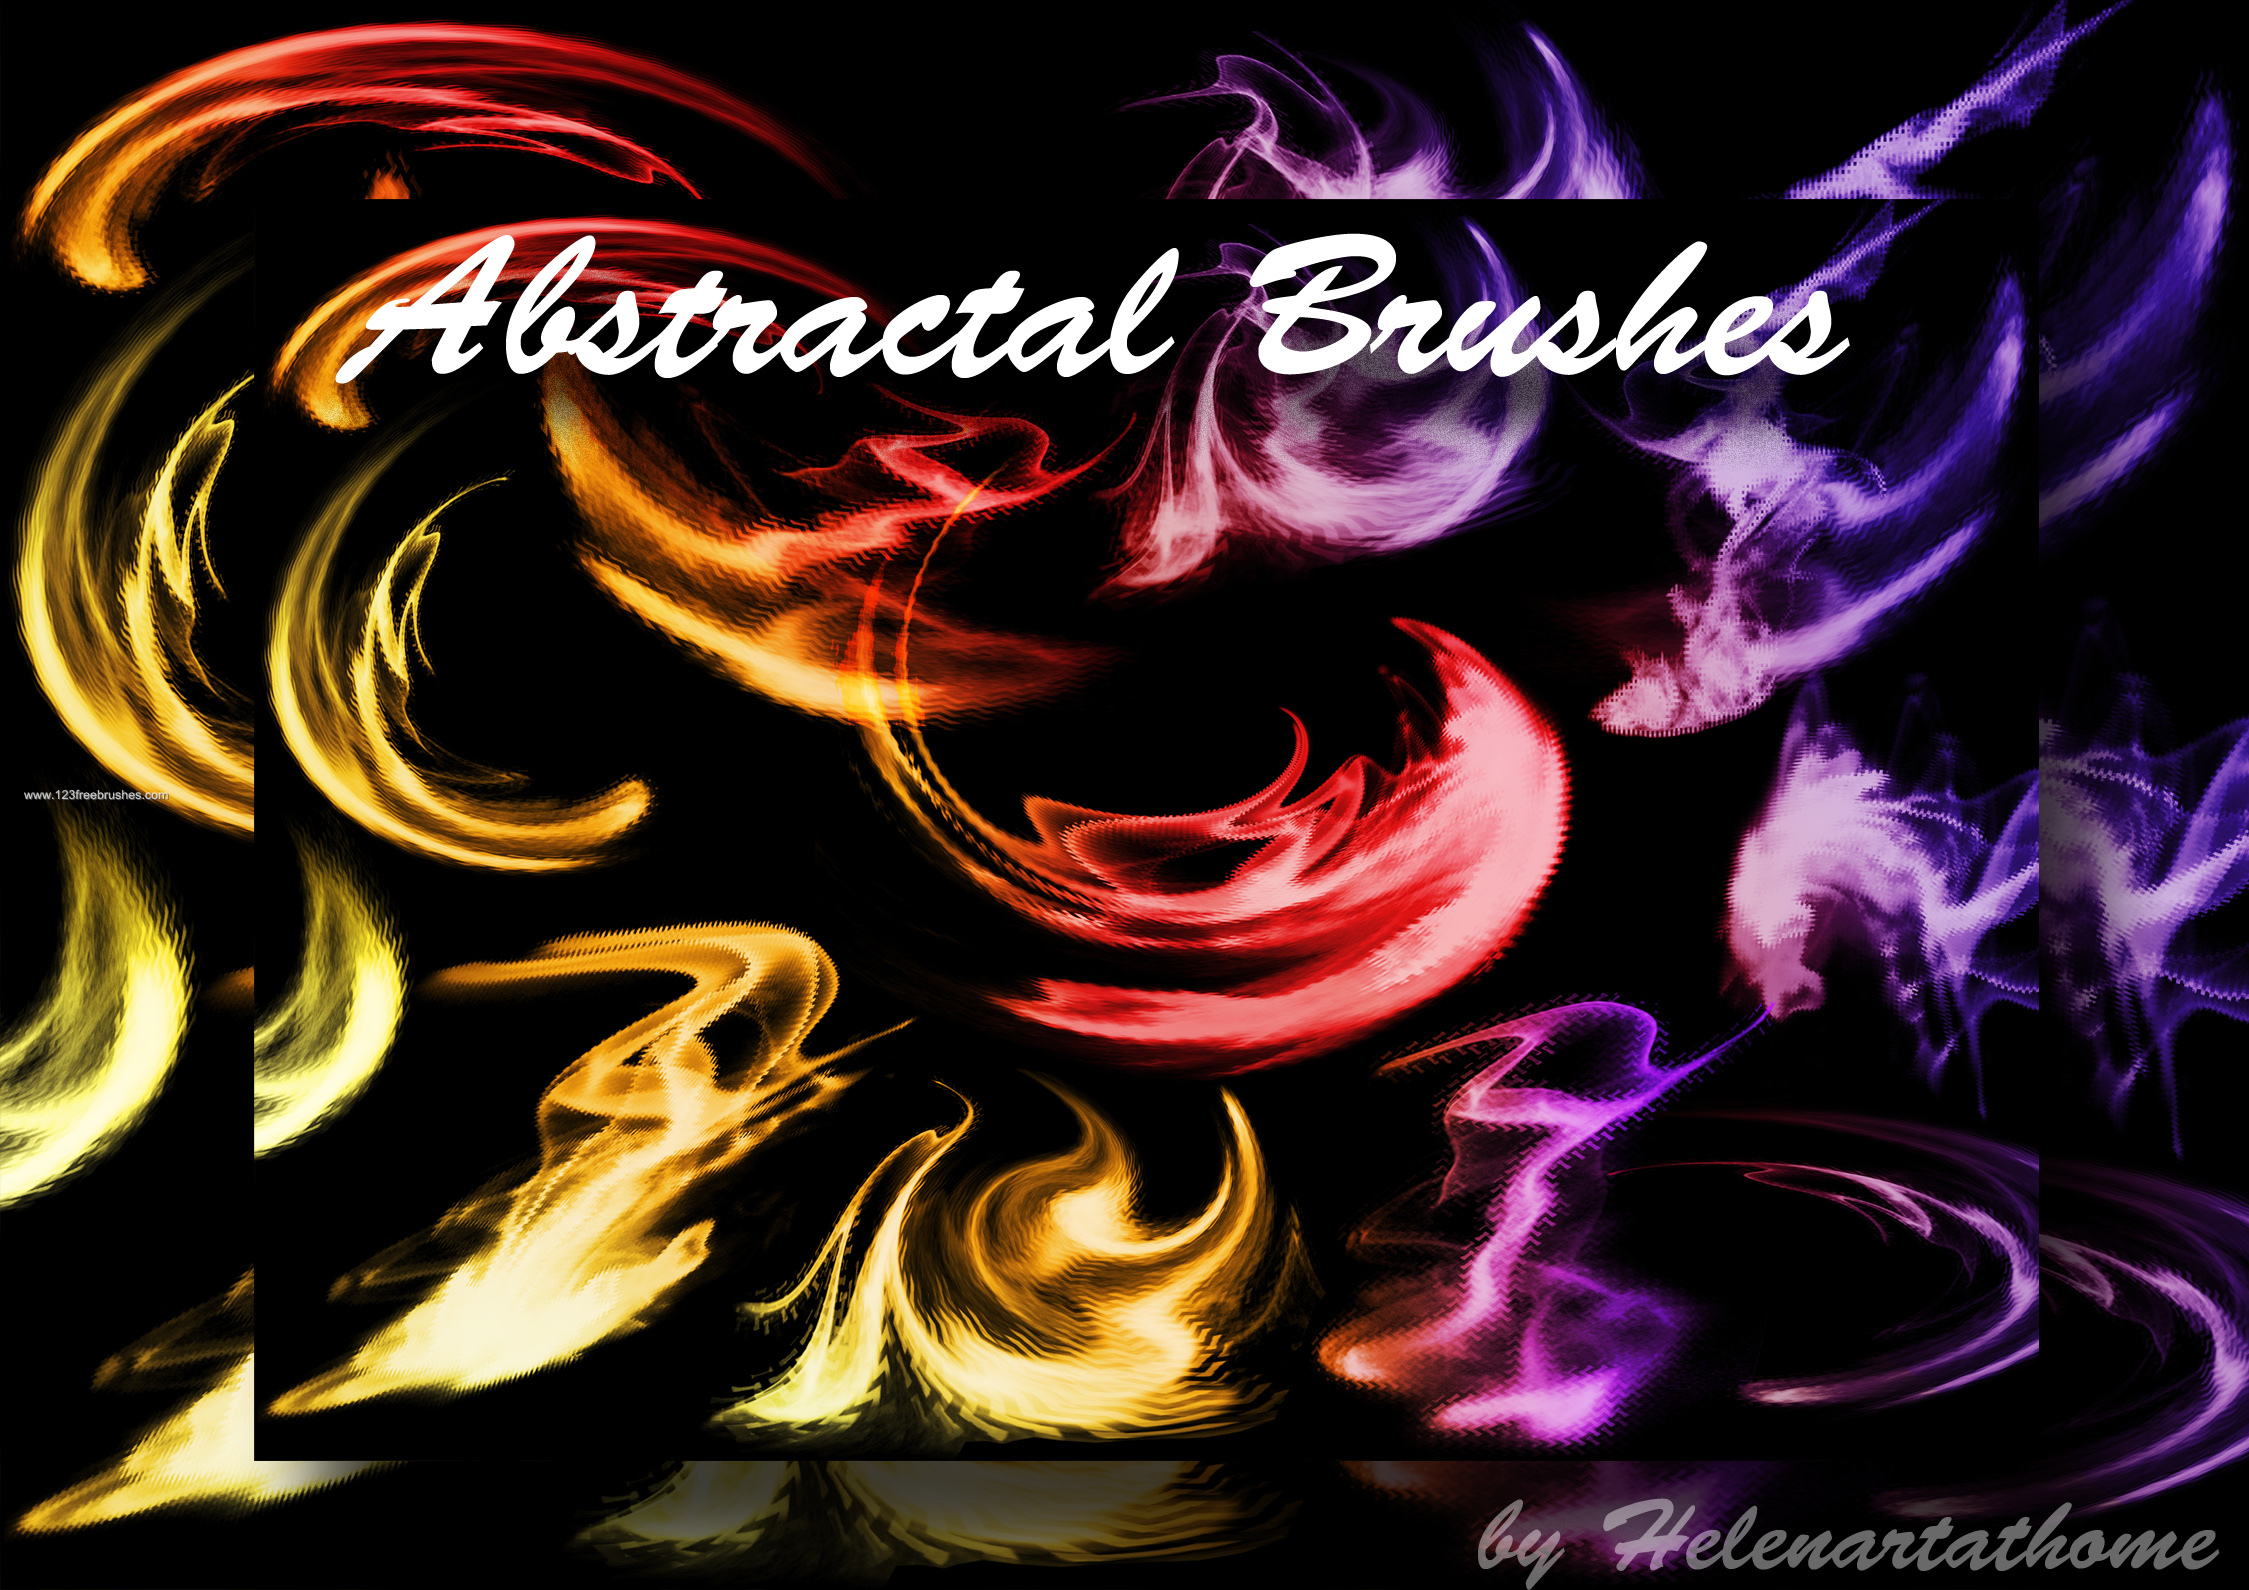 New Abstract Brushes